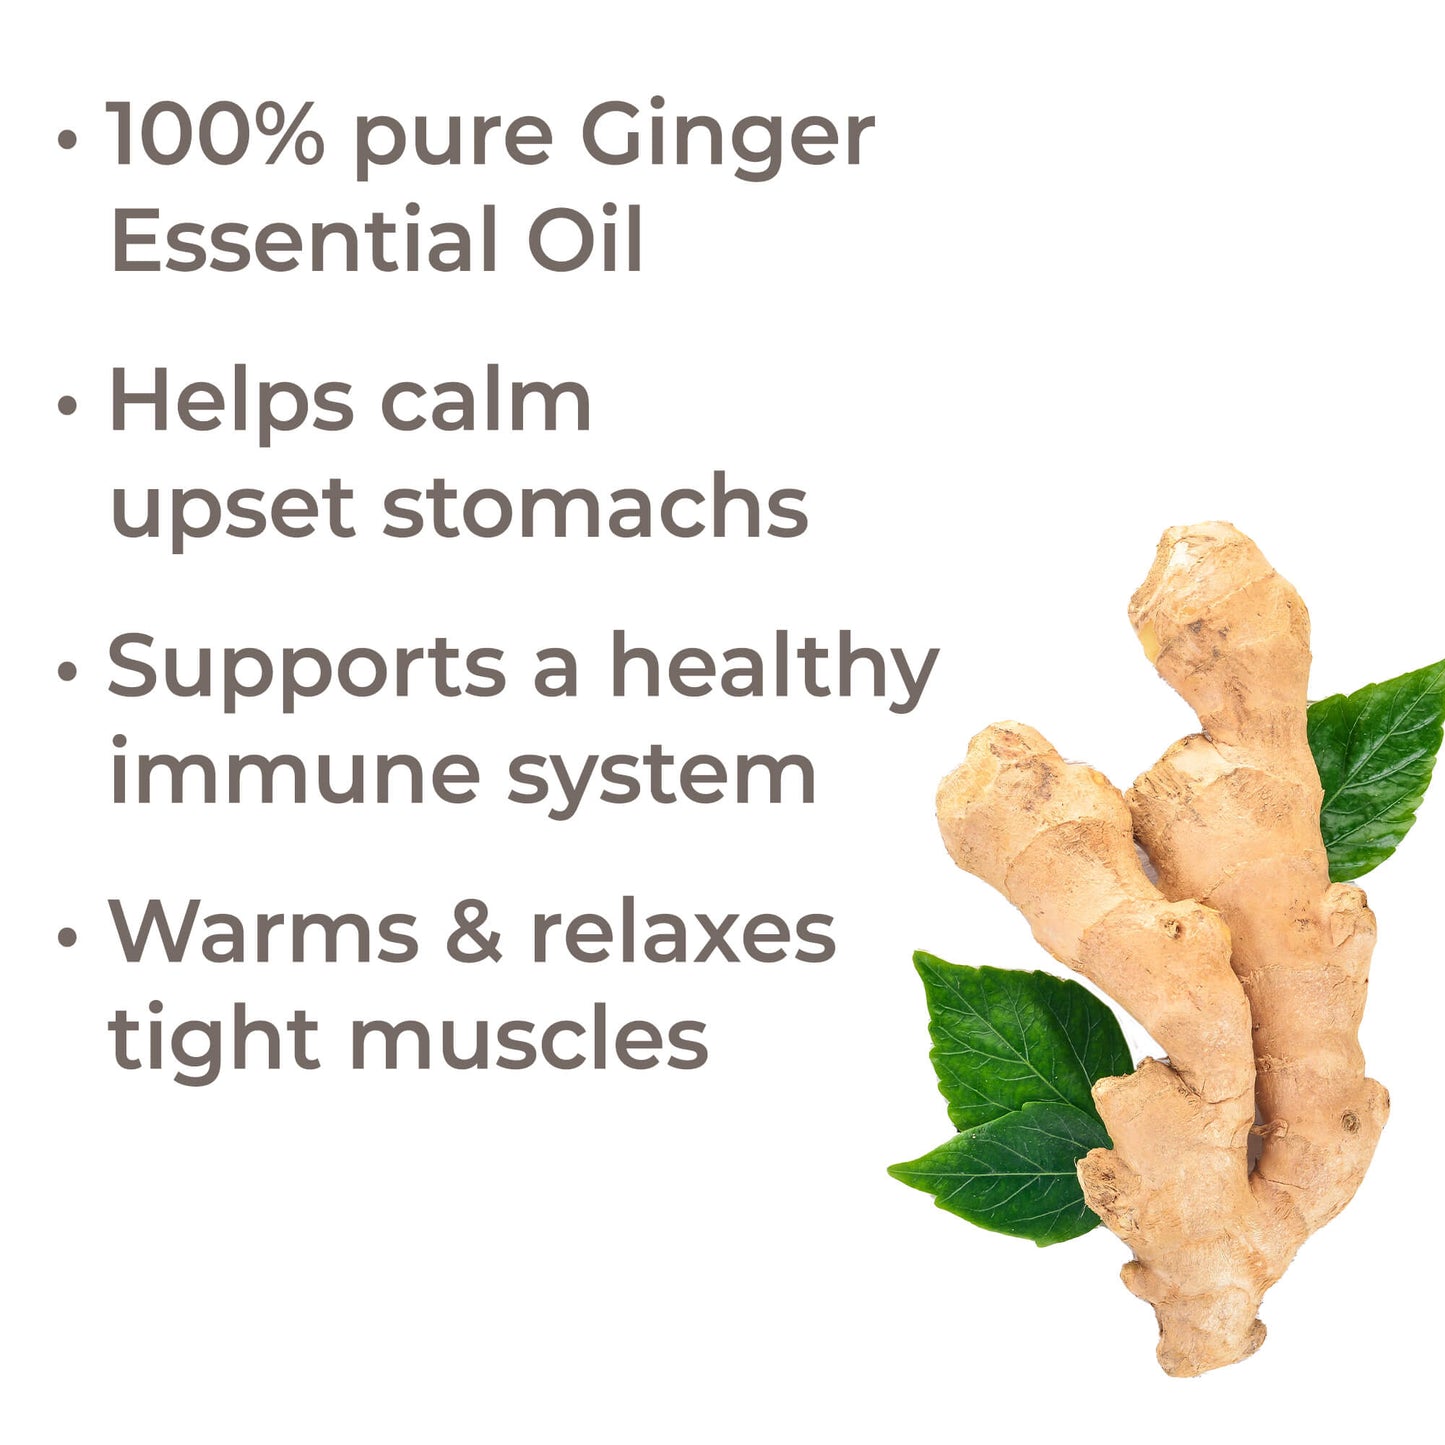 Ginger Essential Oil Benefits - Calm stomach, support immune system, relax muscles